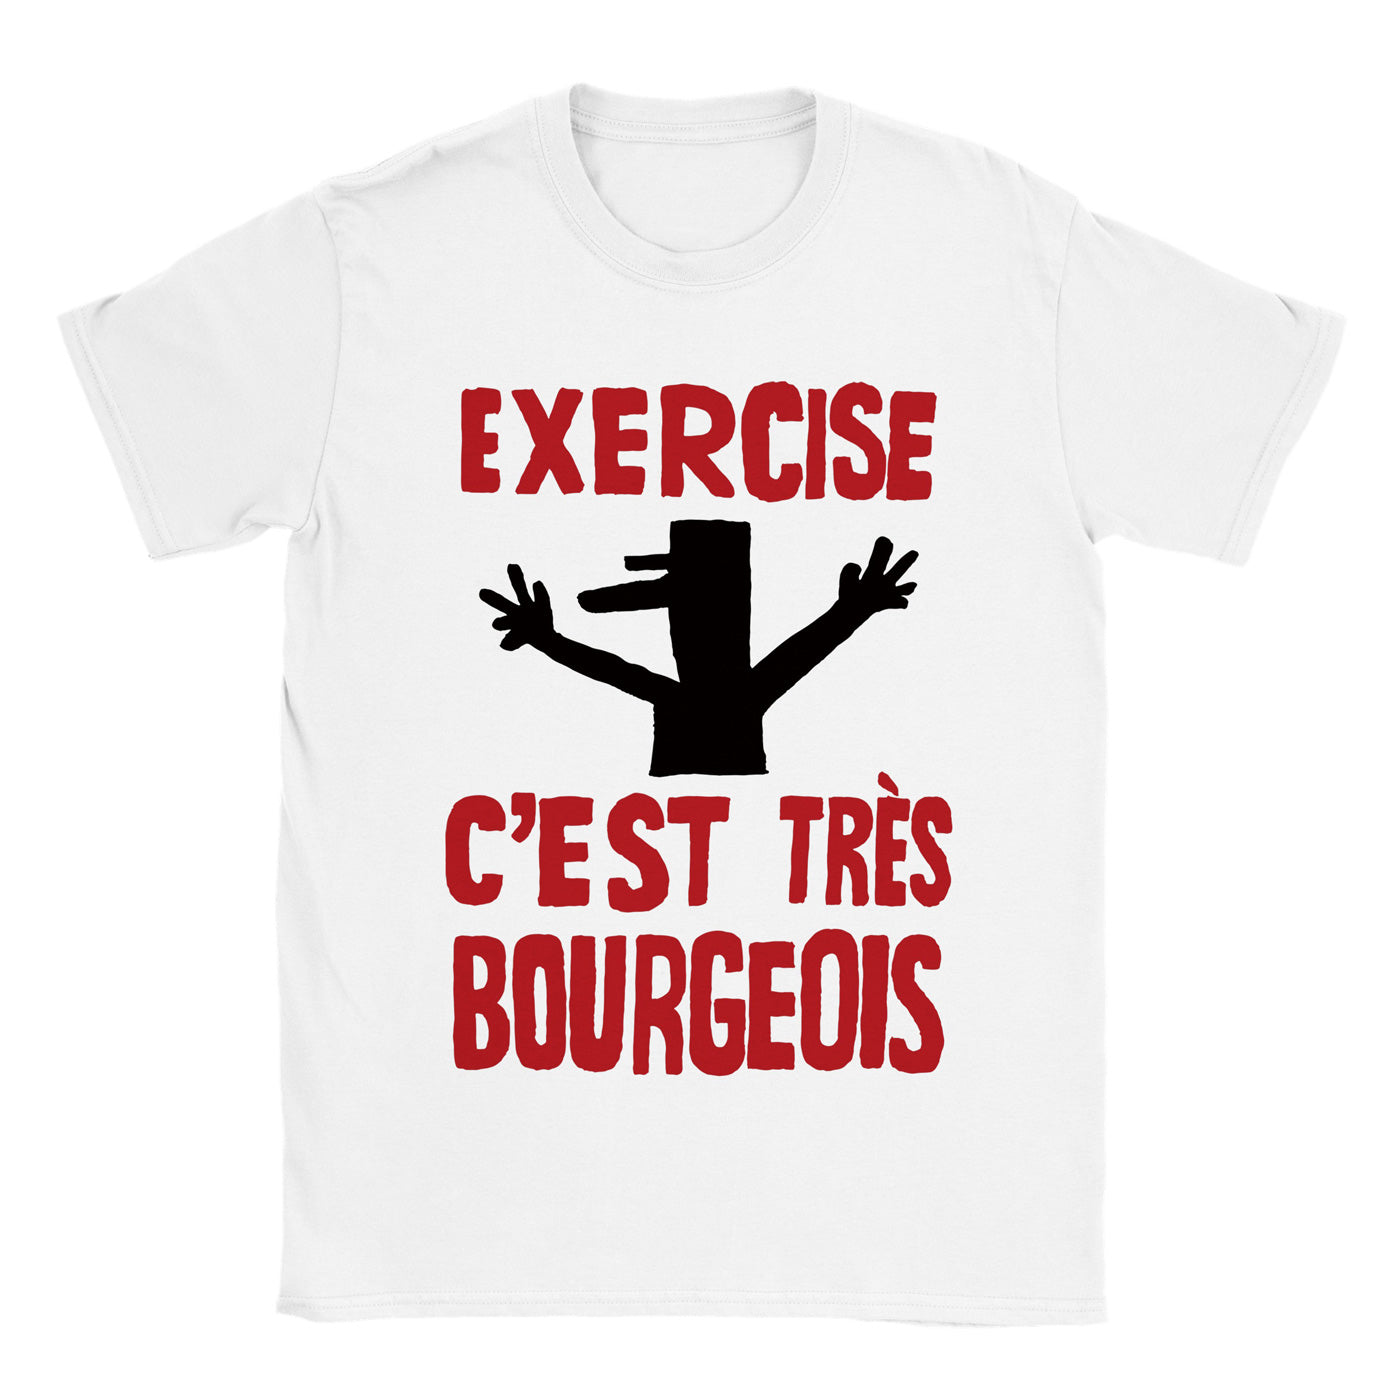 1968 Paris Protest Inspired T-Shirt with Charles de Gaulle Illustration and 'Exercise, c'est très bourgeois' Text